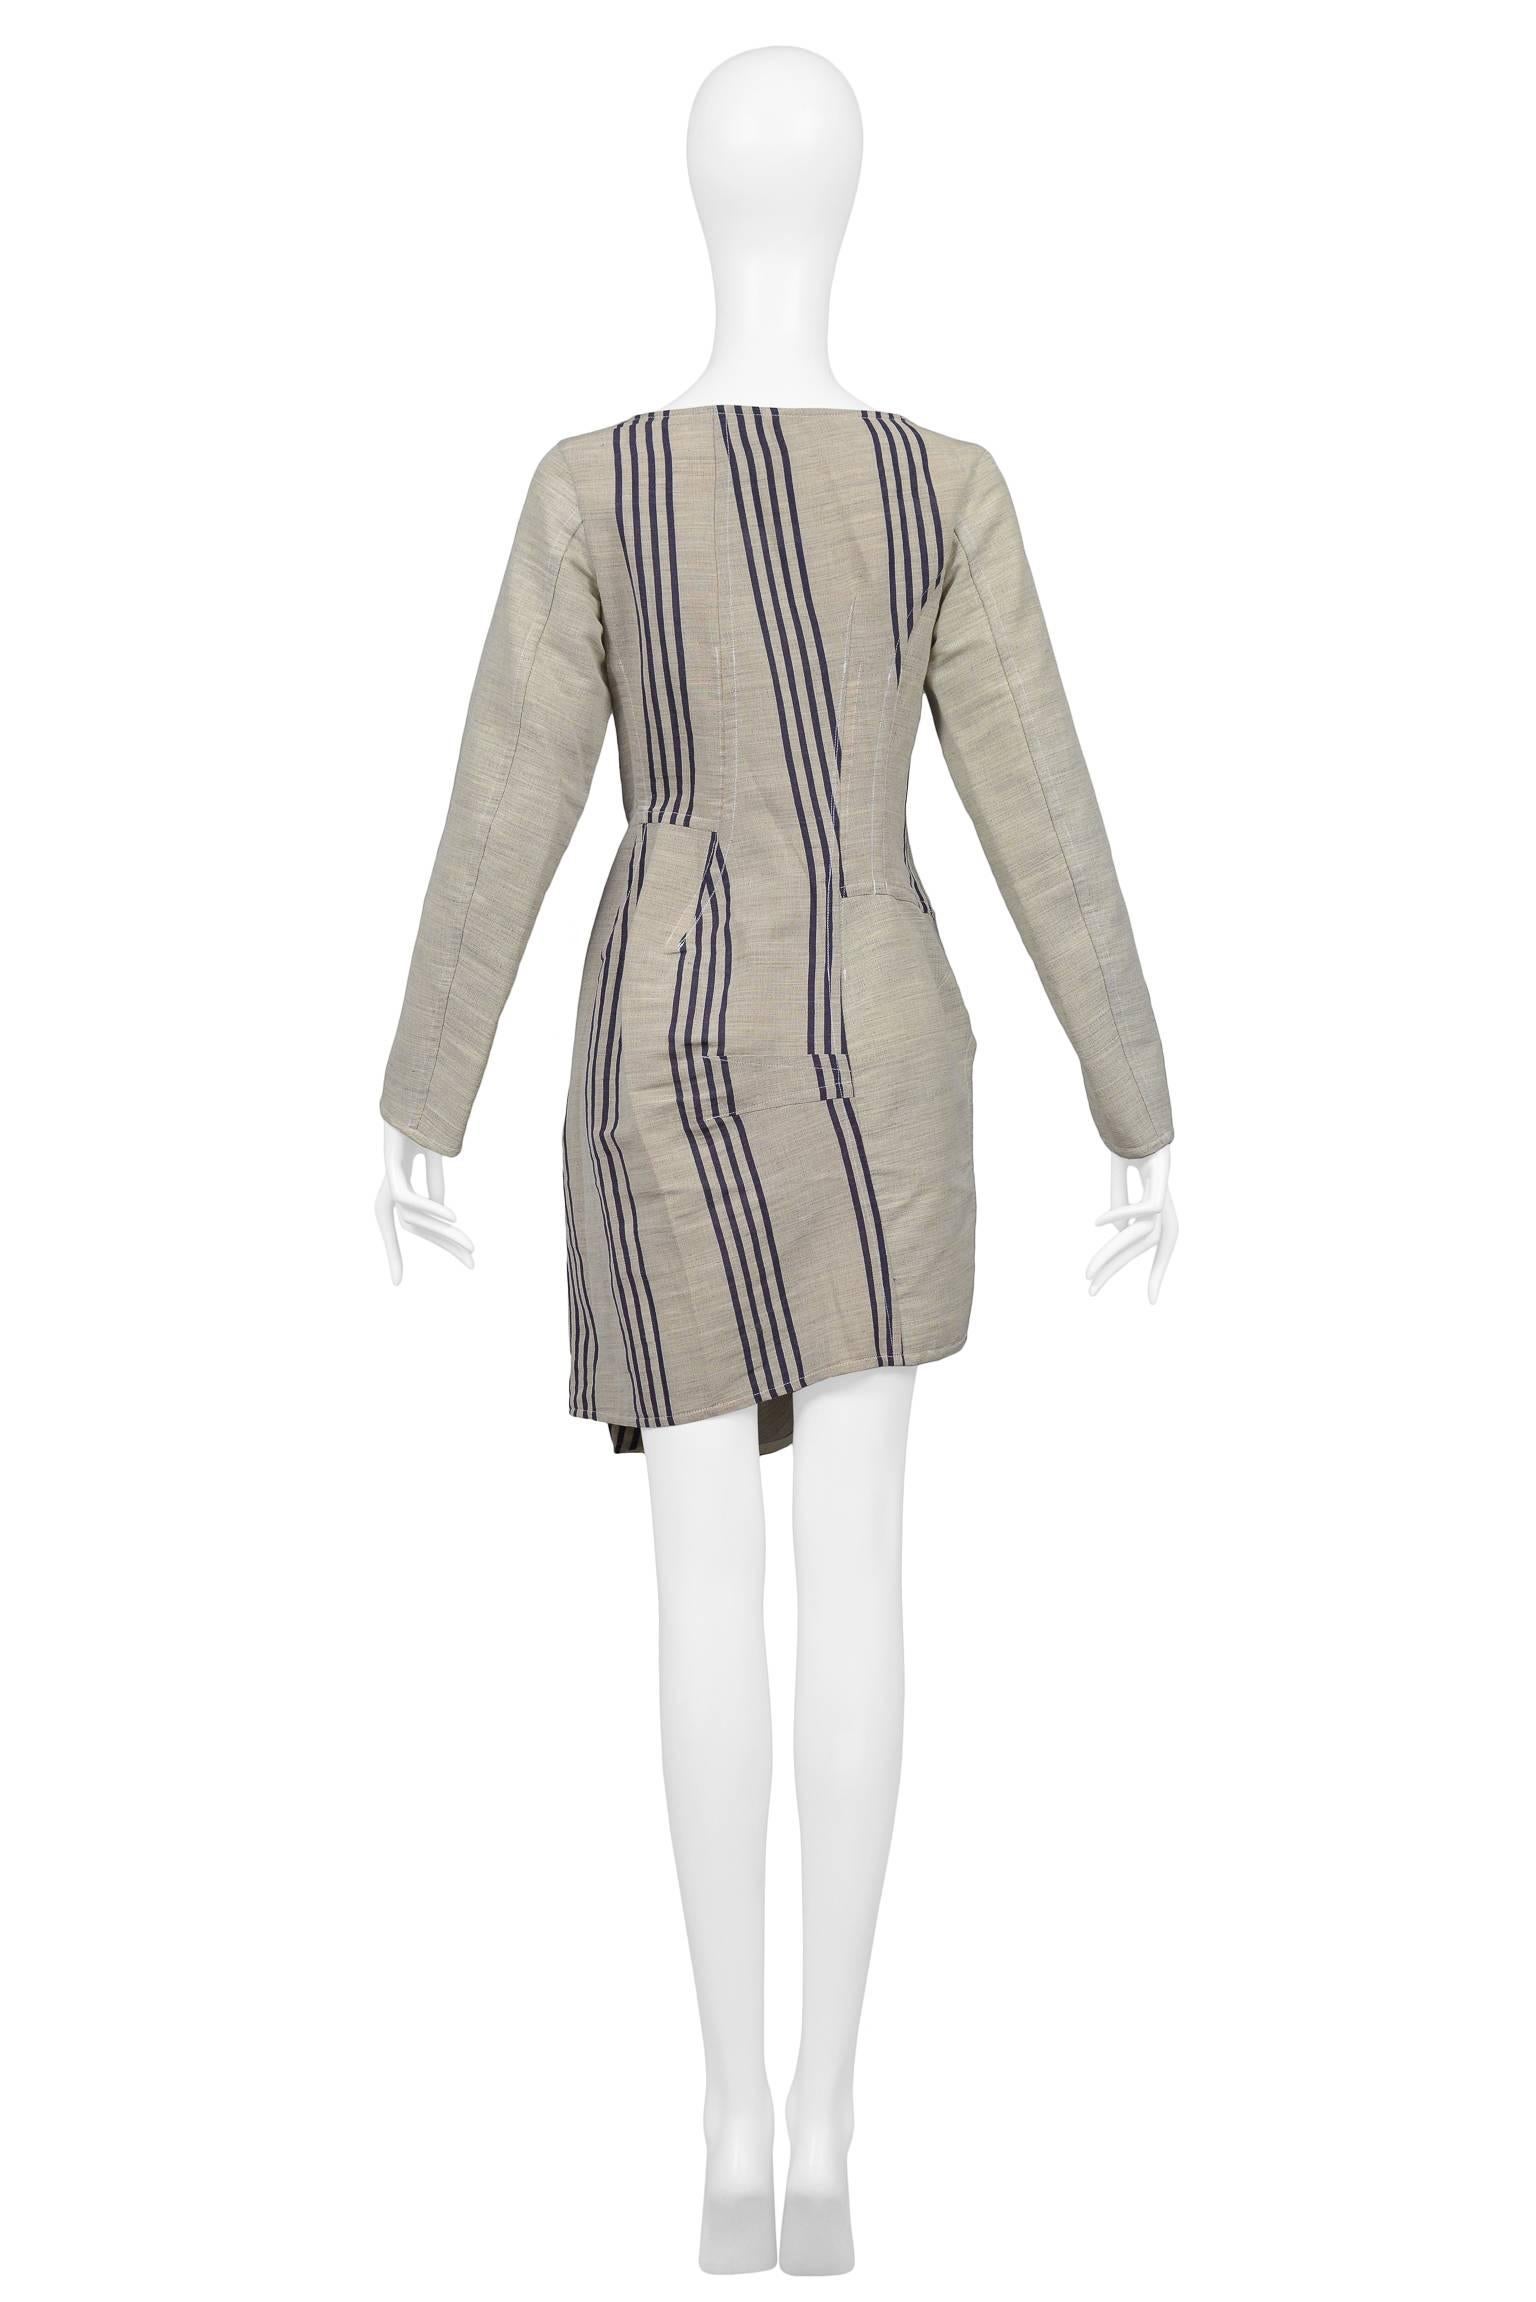 Comme des Garcons Deconstructed Corset Tunic Top With Stripe Panels 1998 In Excellent Condition For Sale In Los Angeles, CA